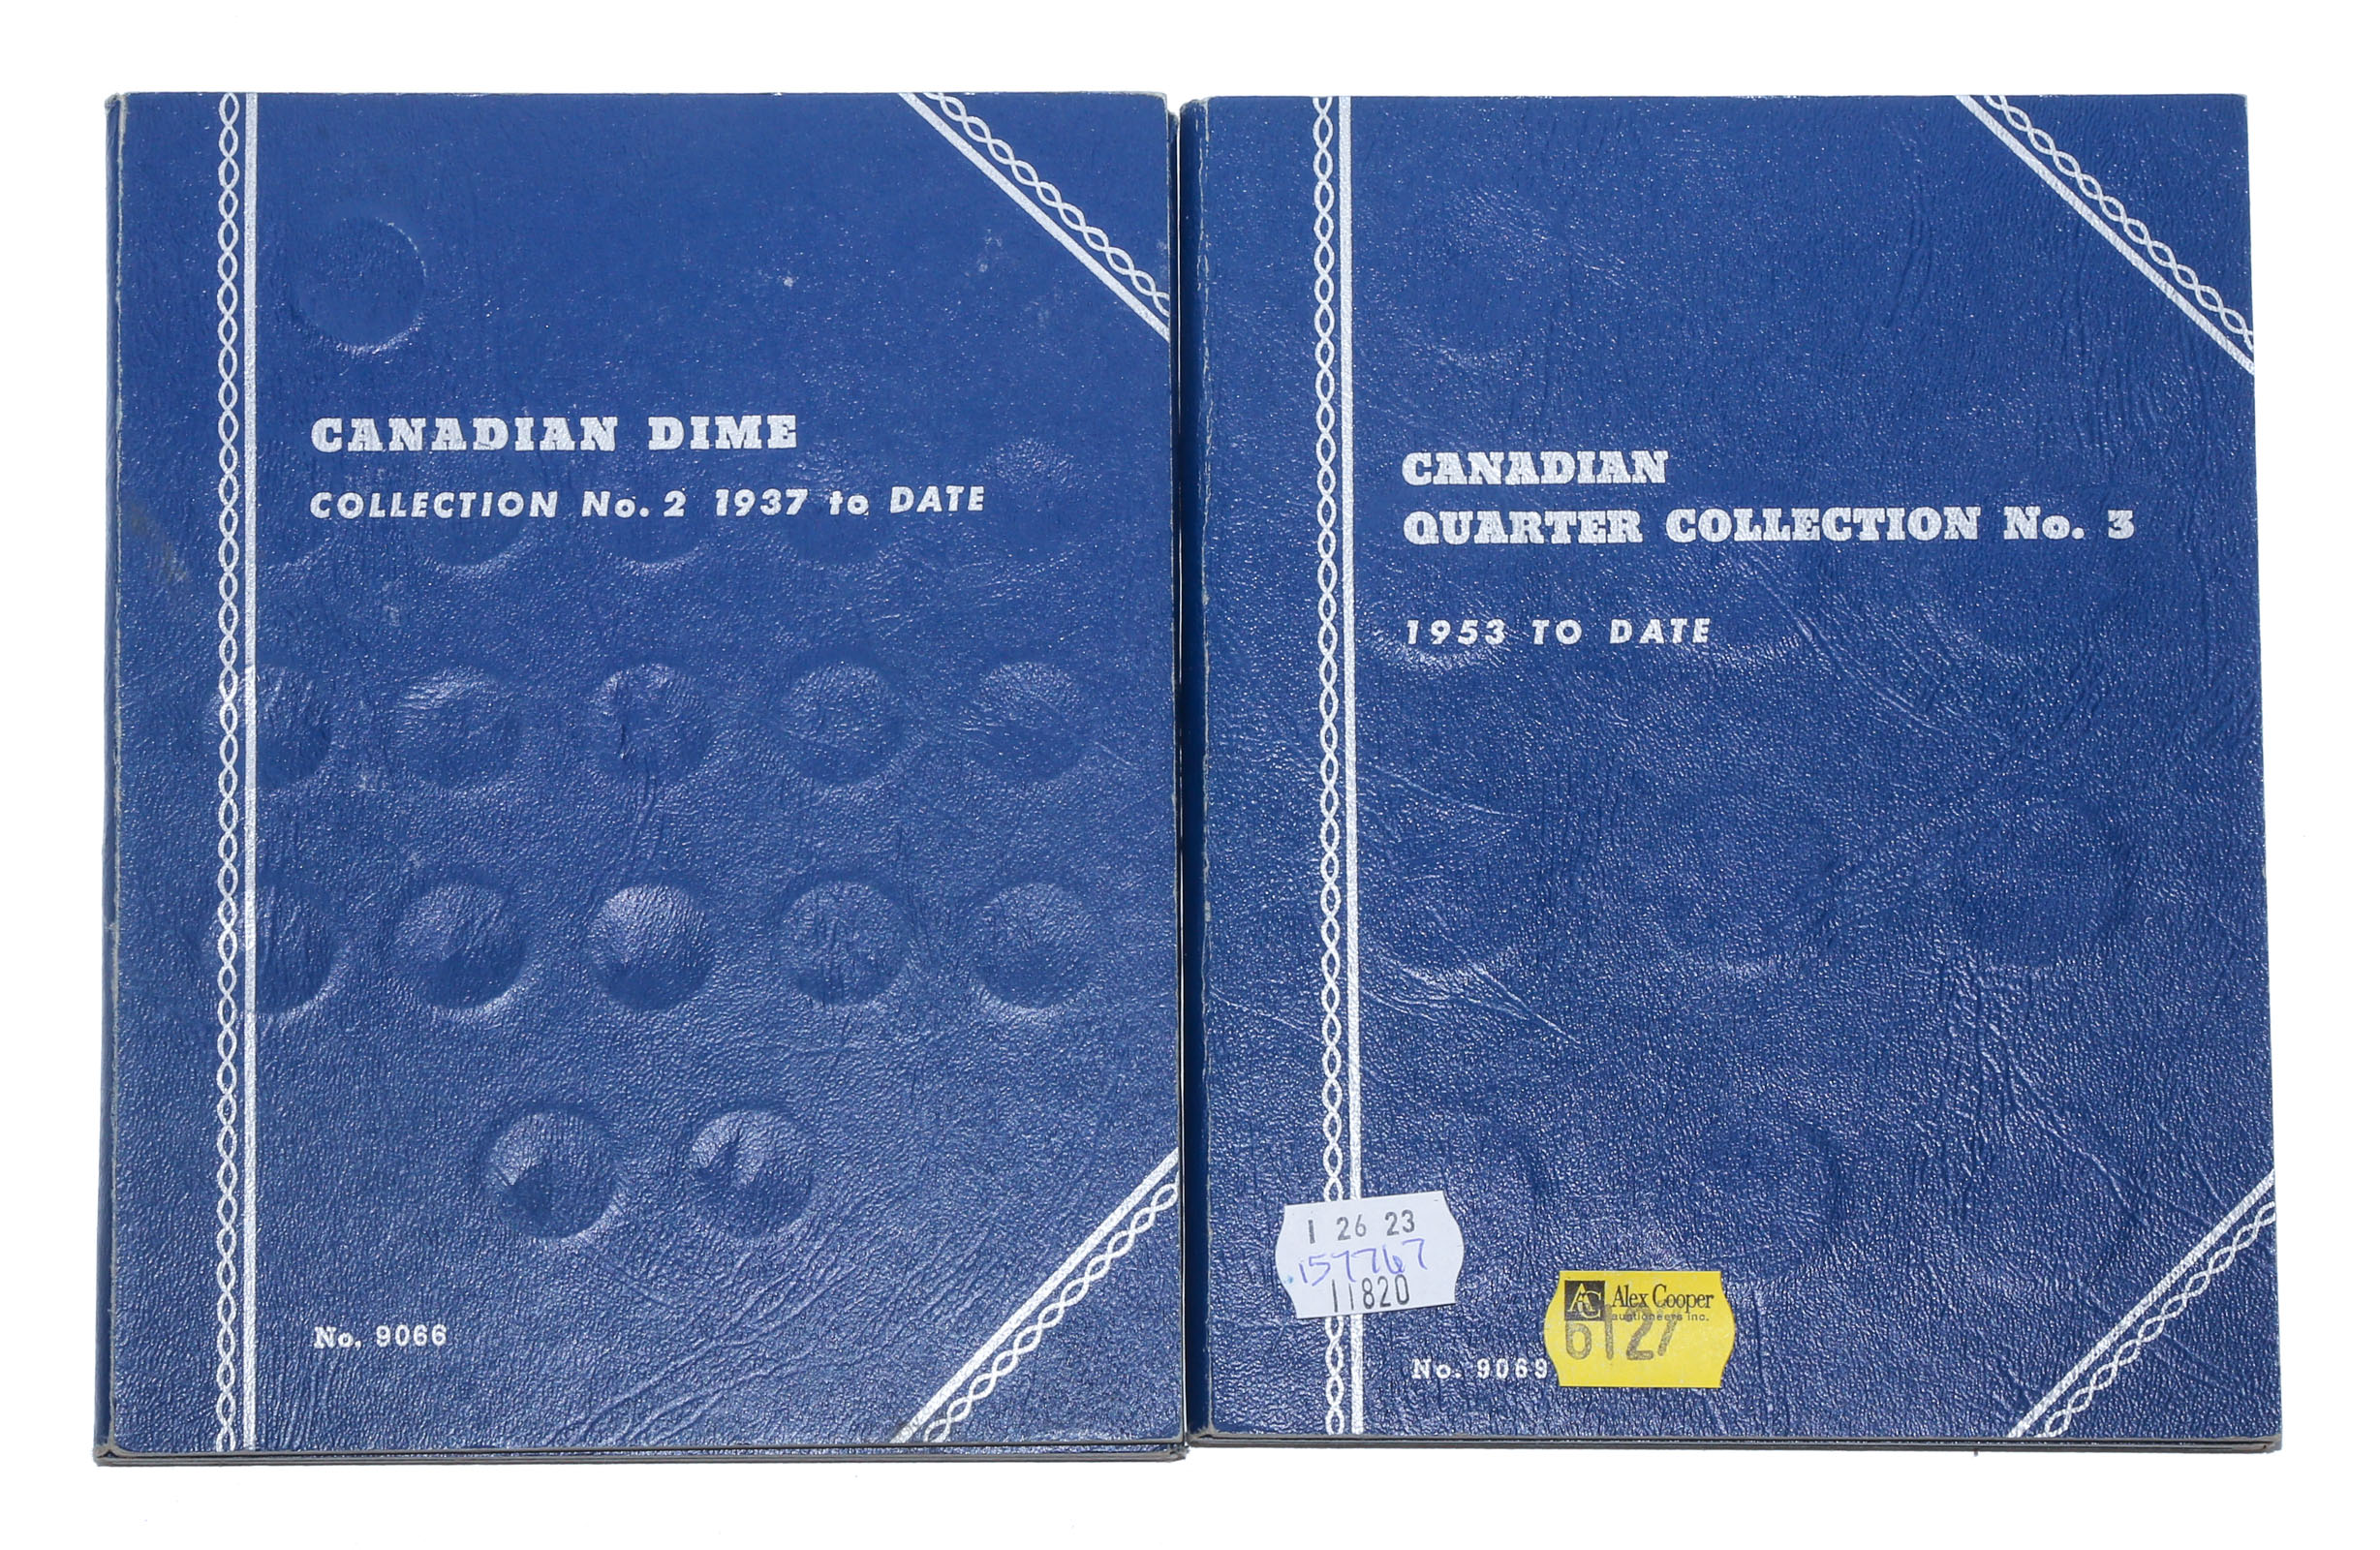 TWO CANADIAN WHITMAN FOLDERS WITH